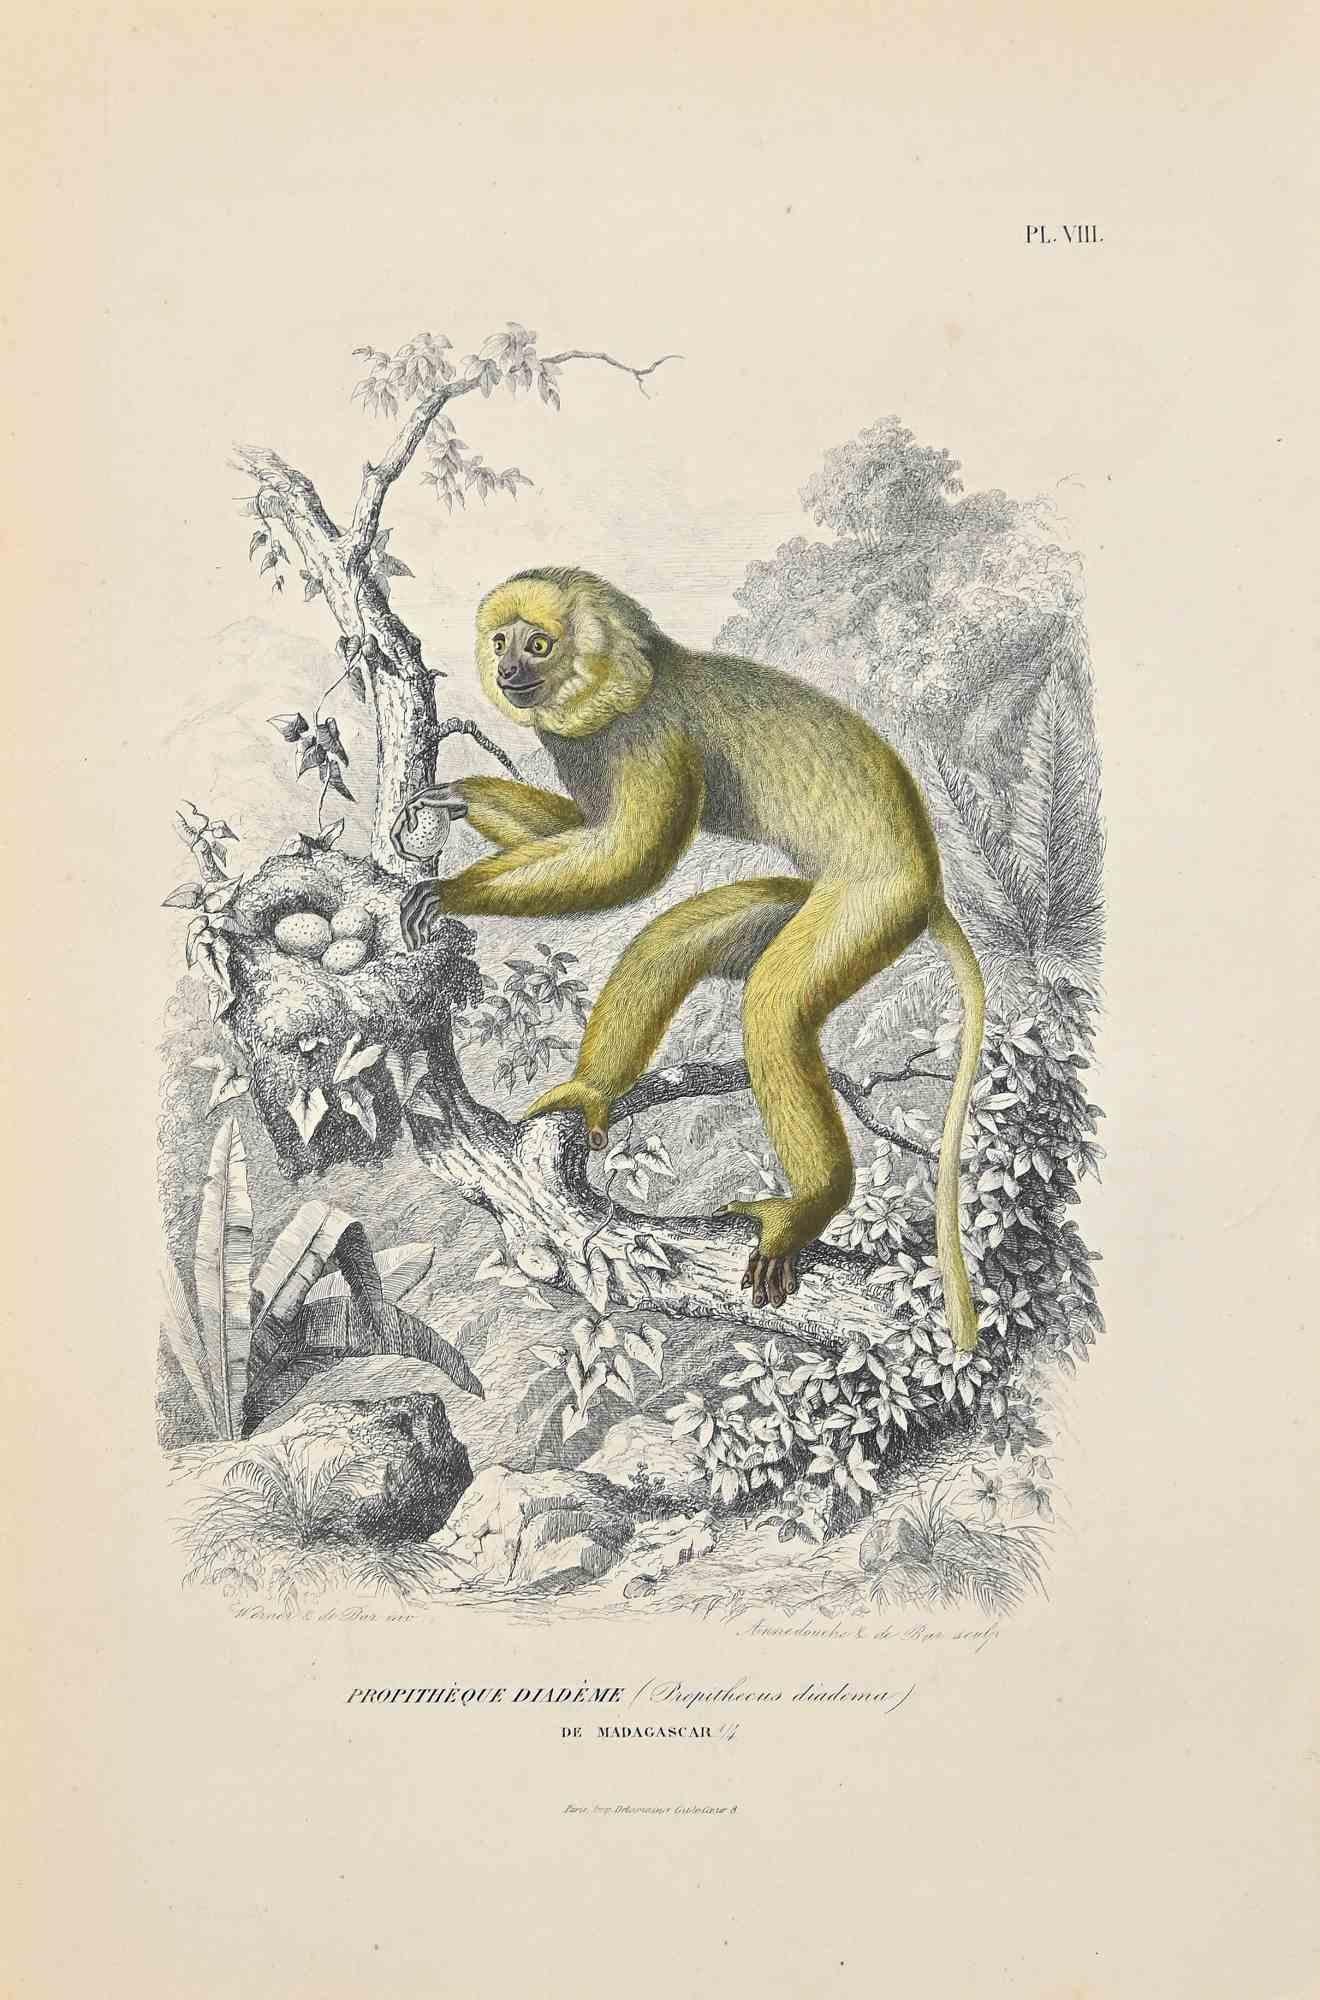 Diademed Sifaka is an original lithograph on ivory-colored paper, realized by Paul Gervais (1816-1879). The artwork is from The Series of "Les Trois Règnes de la Nature", and was published in 1854.

Good conditions except for some foxings.

Titled